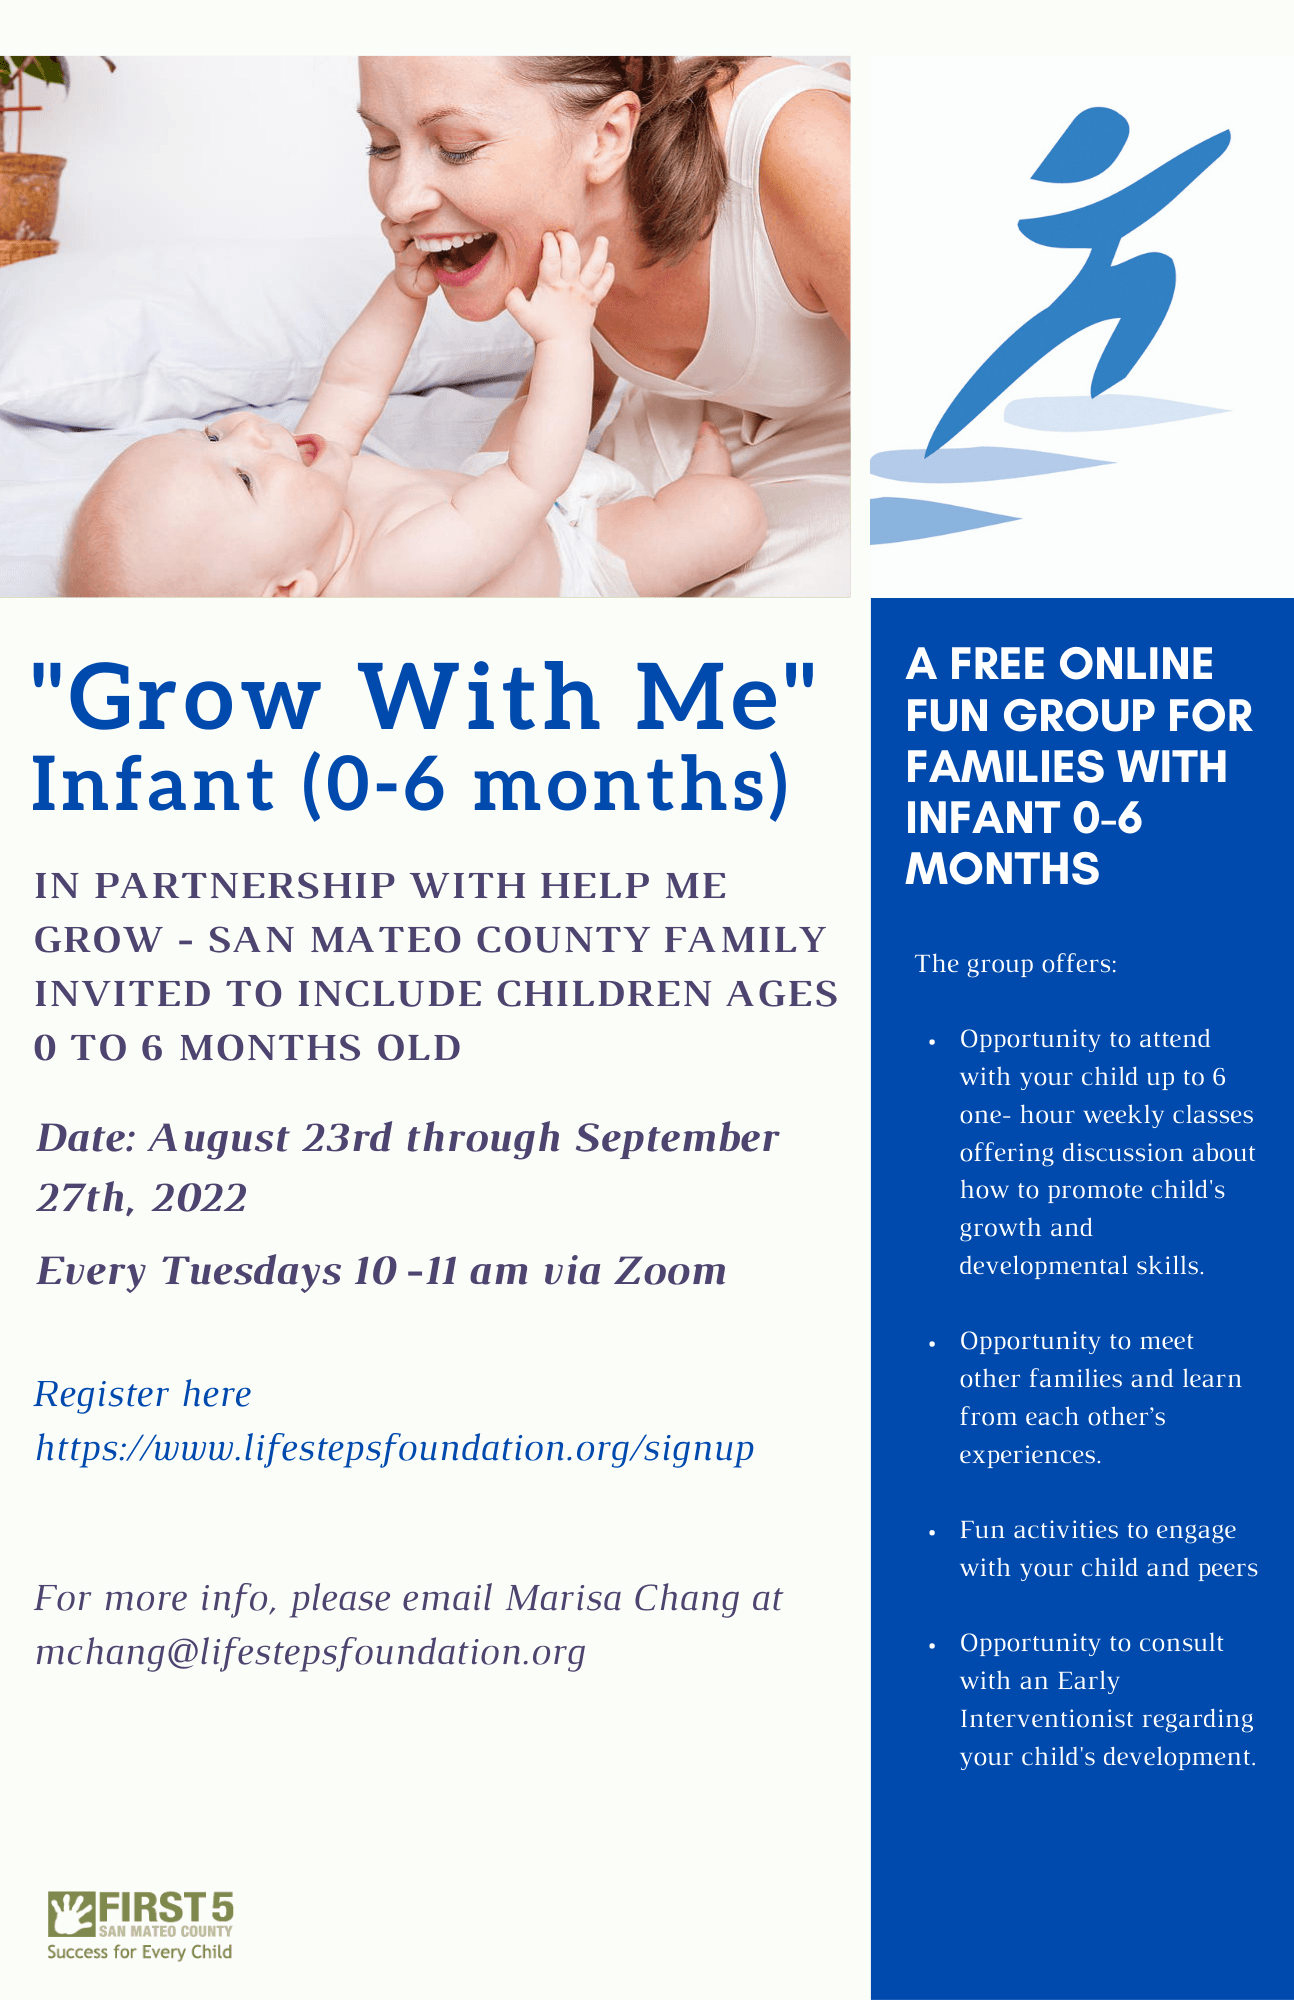 Grow With Me Infant Group - Runs from August 23, 2022 to September 27, 2022